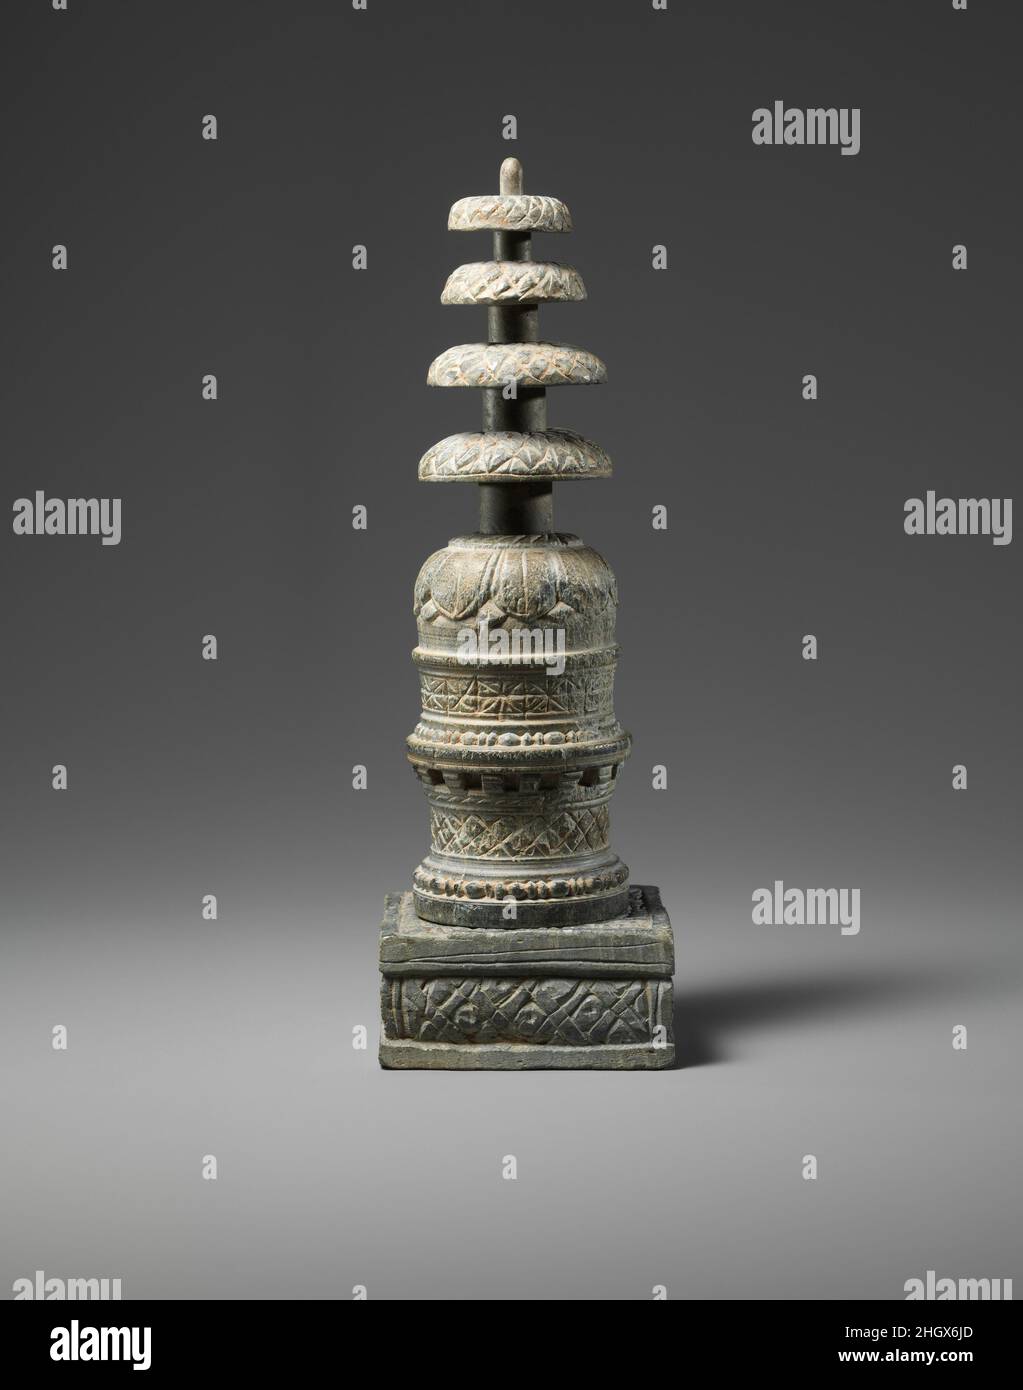 Reliquary in the Form of a Miniature Stupa 2nd–3rd century Pakistan (ancient region of Gandhara) Miniature reliquaries in the form of a stupa such as the example seen here, provide a clear architectural representation of the monumental stupas of the Gandharan region, none of whose superstructures survive intact today.. Reliquary in the Form of a Miniature Stupa. Pakistan (ancient region of Gandhara). 2nd–3rd century. Schist. Sculpture Stock Photo